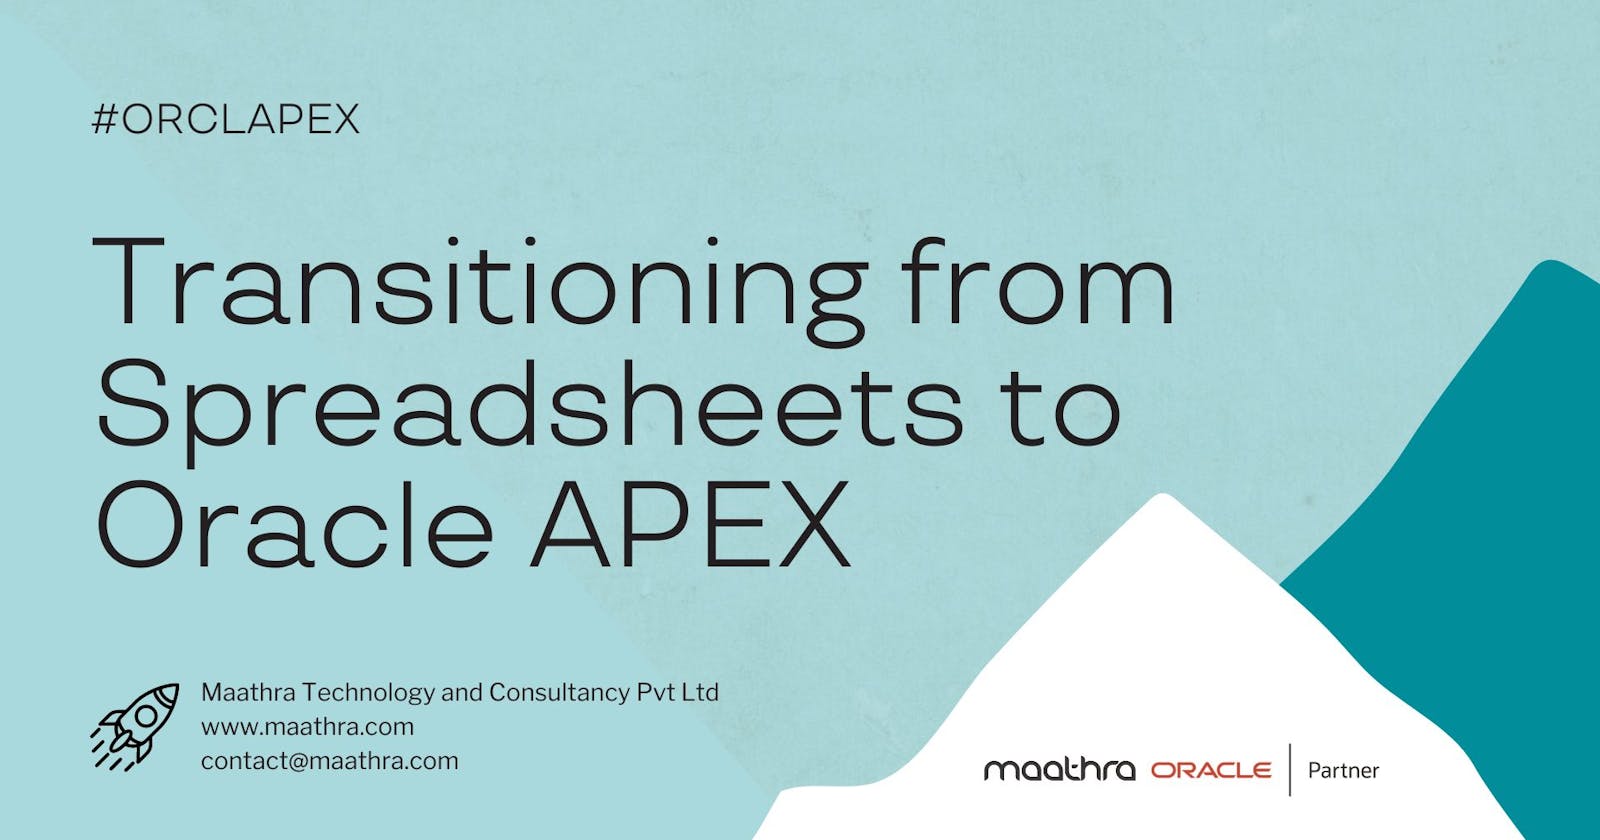 Oracle APEX Use Cases: Spreadsheet Replacement